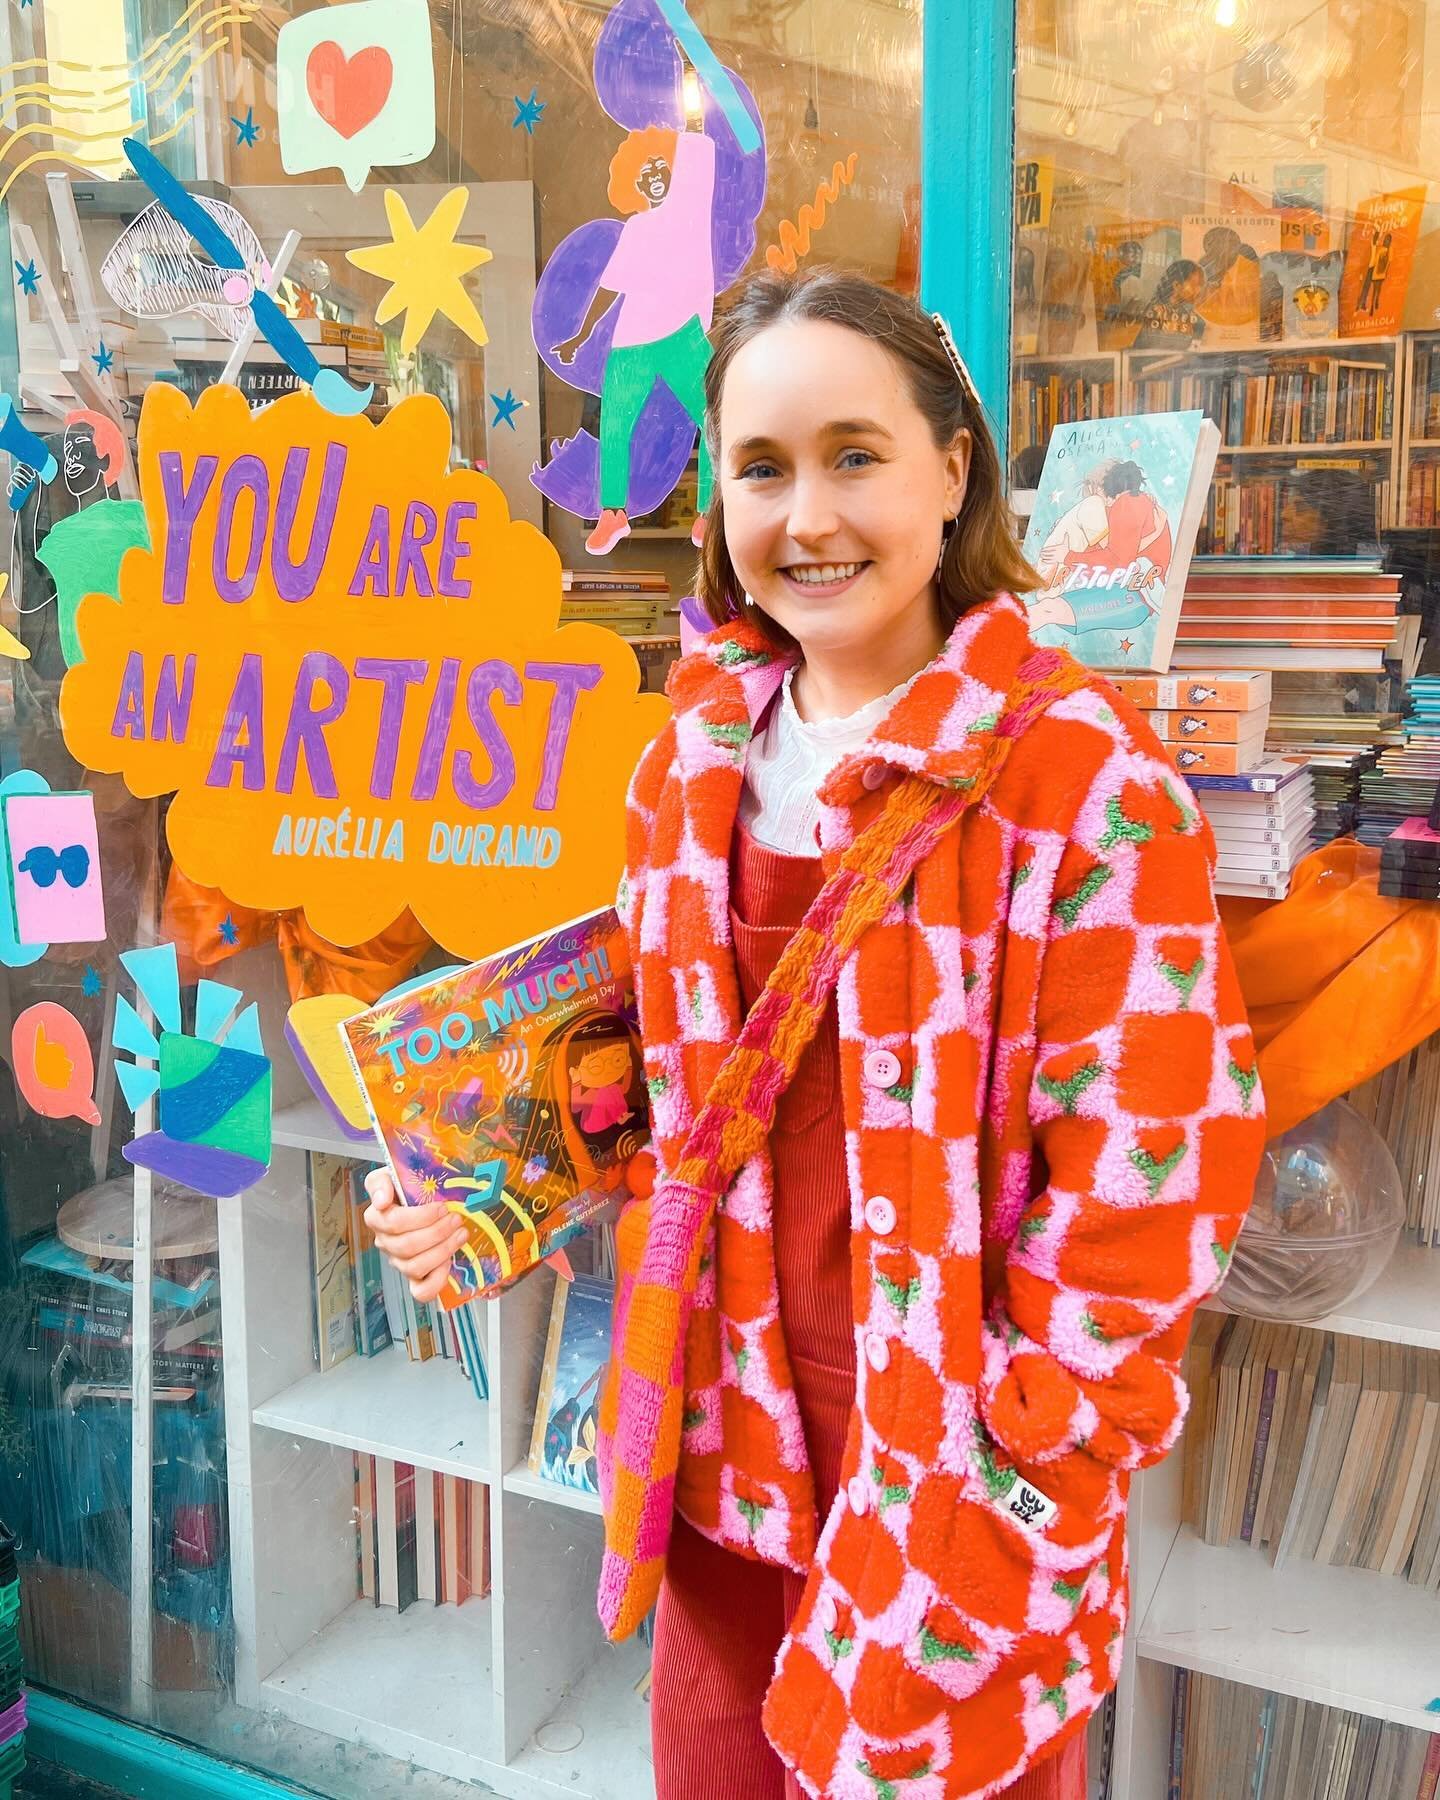 I went to visit one of my favourite bookshops (@roundtablebooks in Brixton Village) and picked up a picture book for research 😋 you have to take a picture with this beautiful window art because it made me very happy. What a good reminder! 🎉